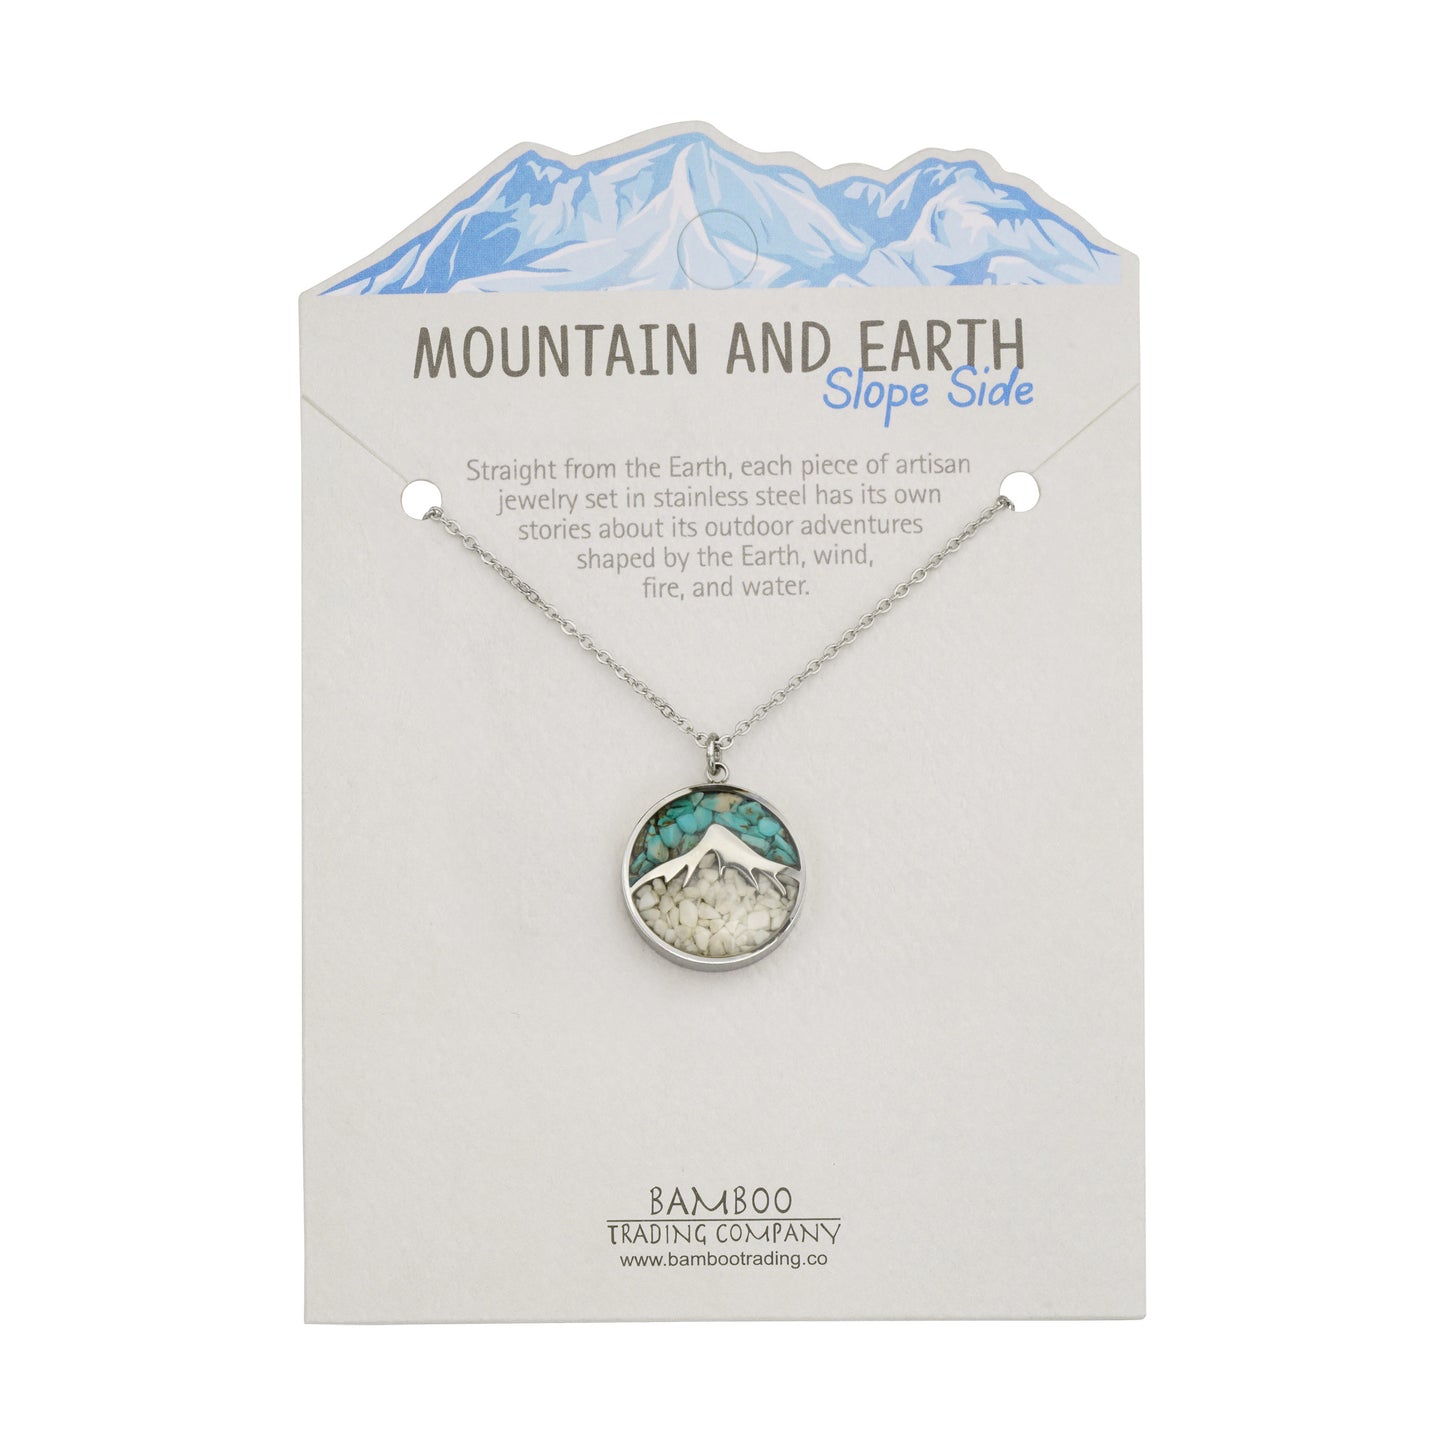 Mountain and Earth Slope Side Necklaces